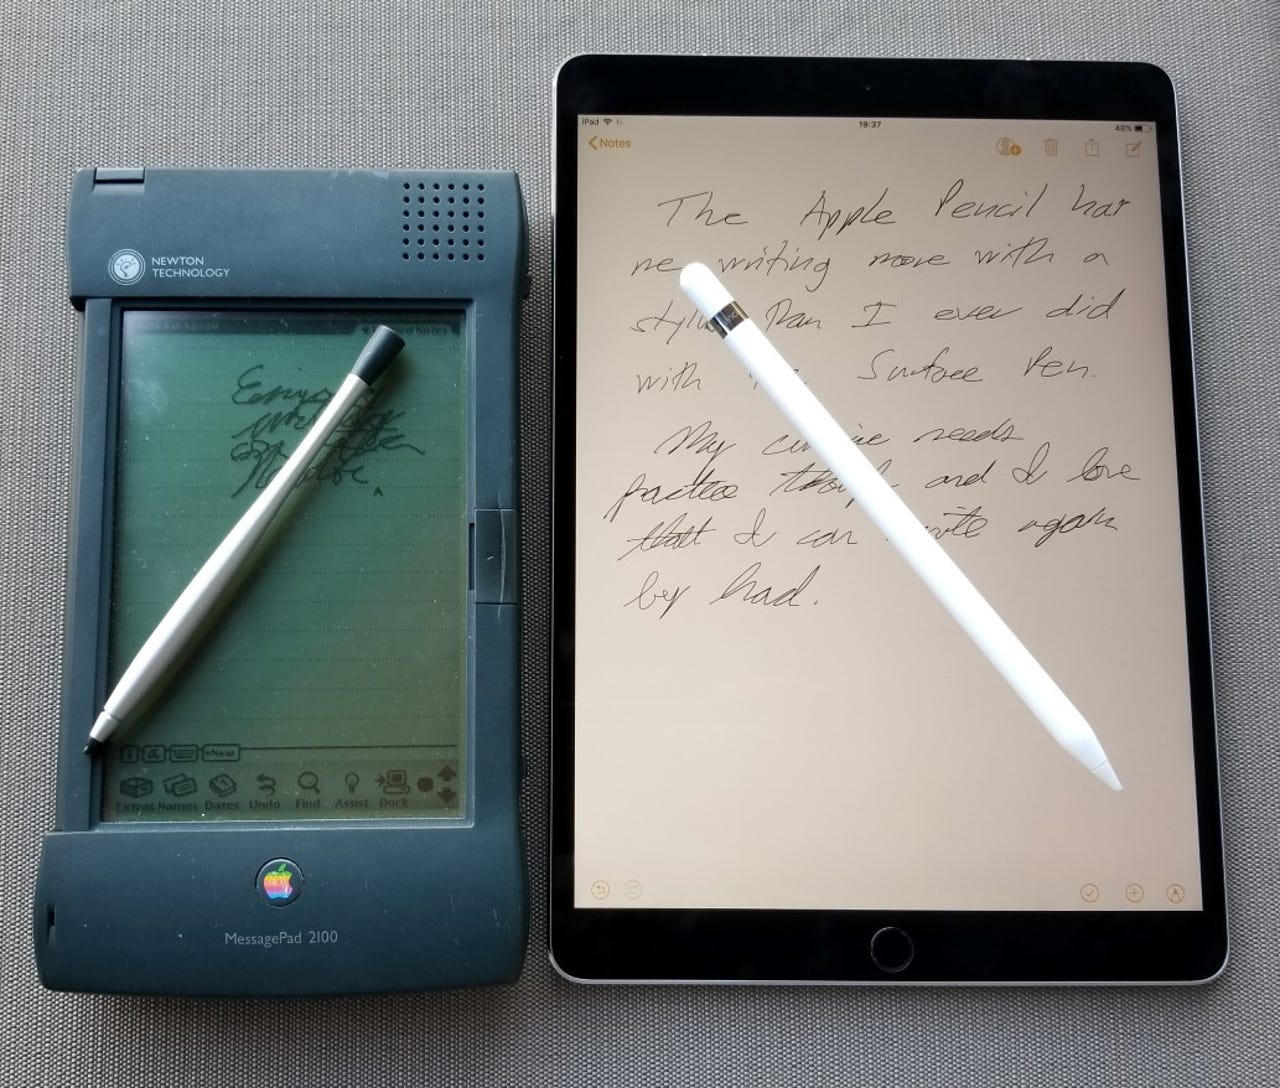 I mocked the Apple Pencil. Now my iPad productivity depends on it